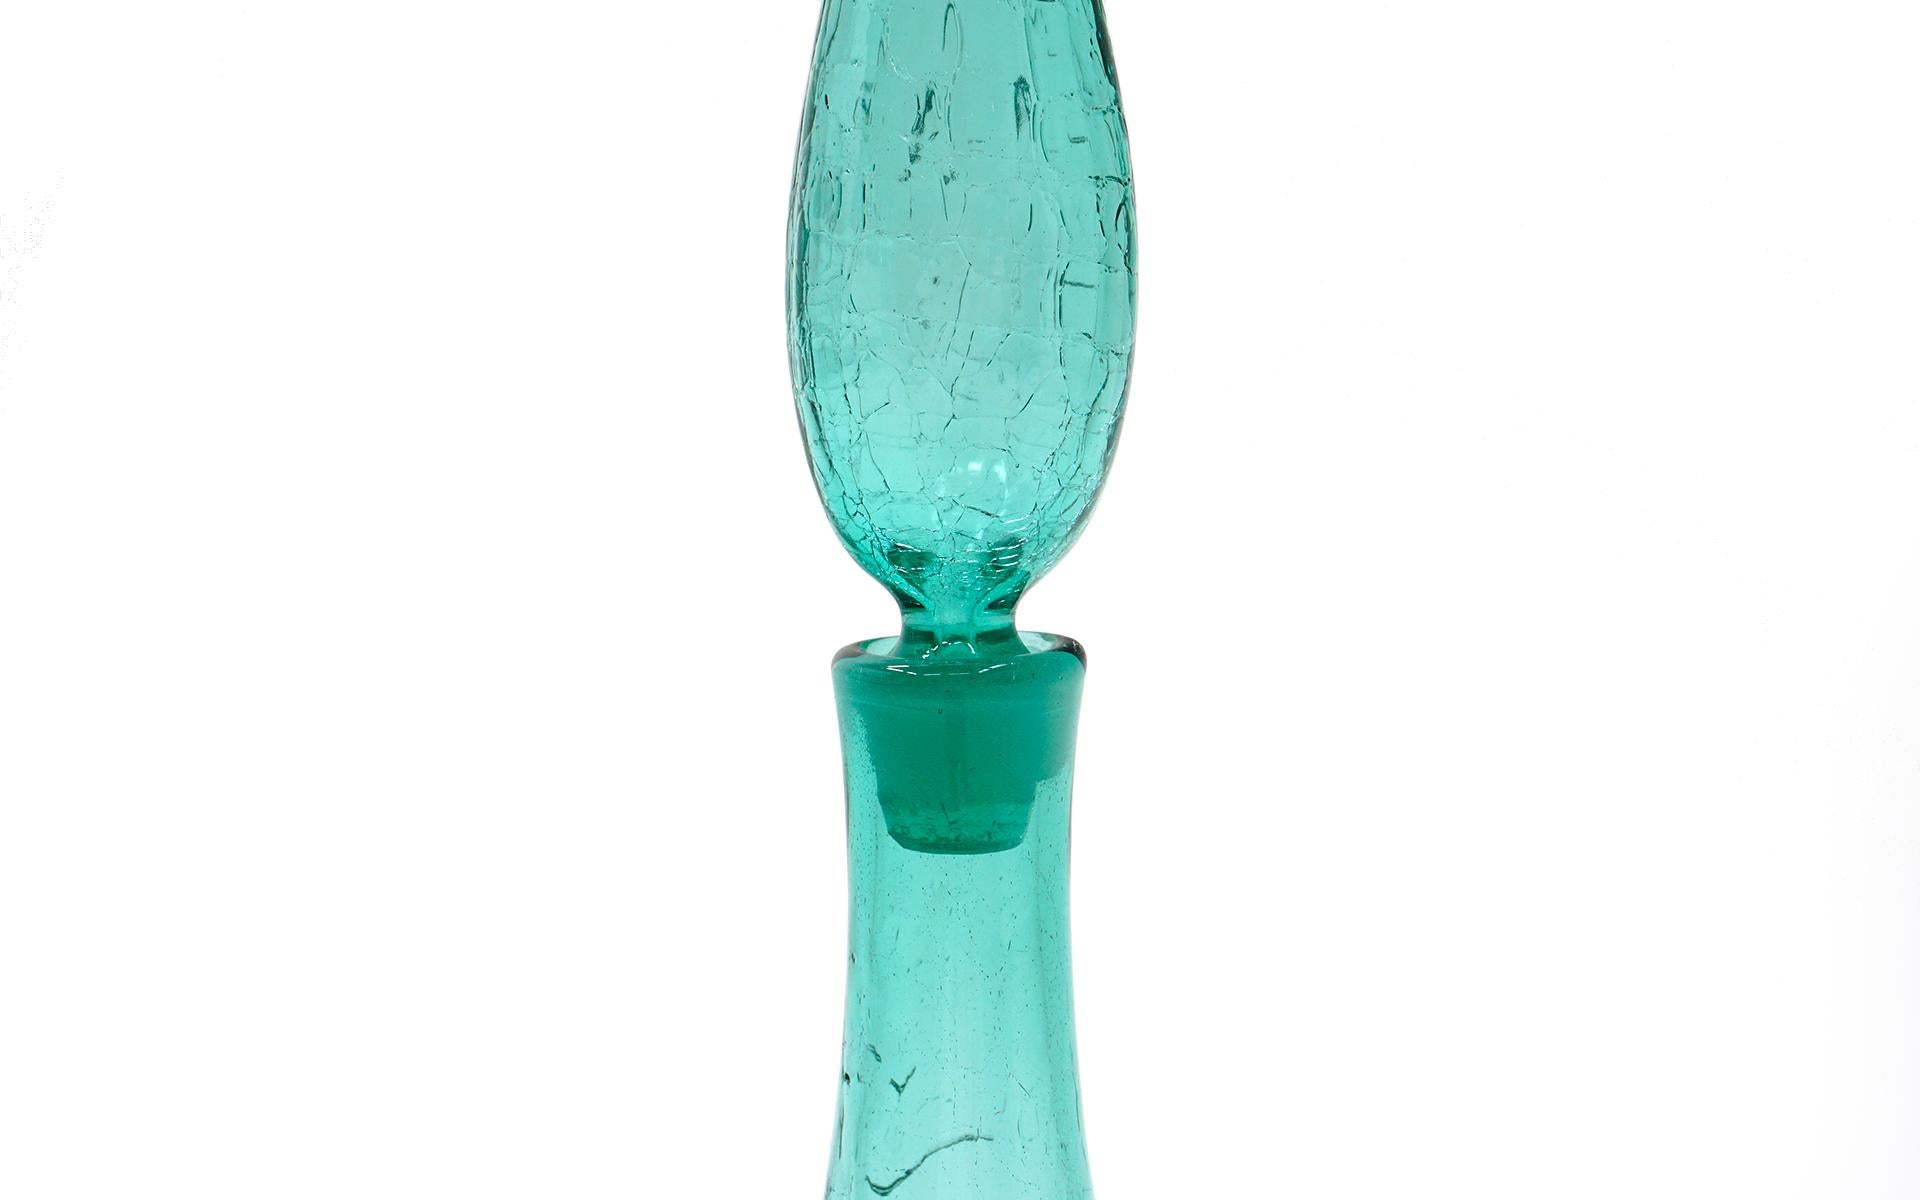 American Tall Blenko Green Crackle Glass Decanter with Original Stopper, Mint Conditon